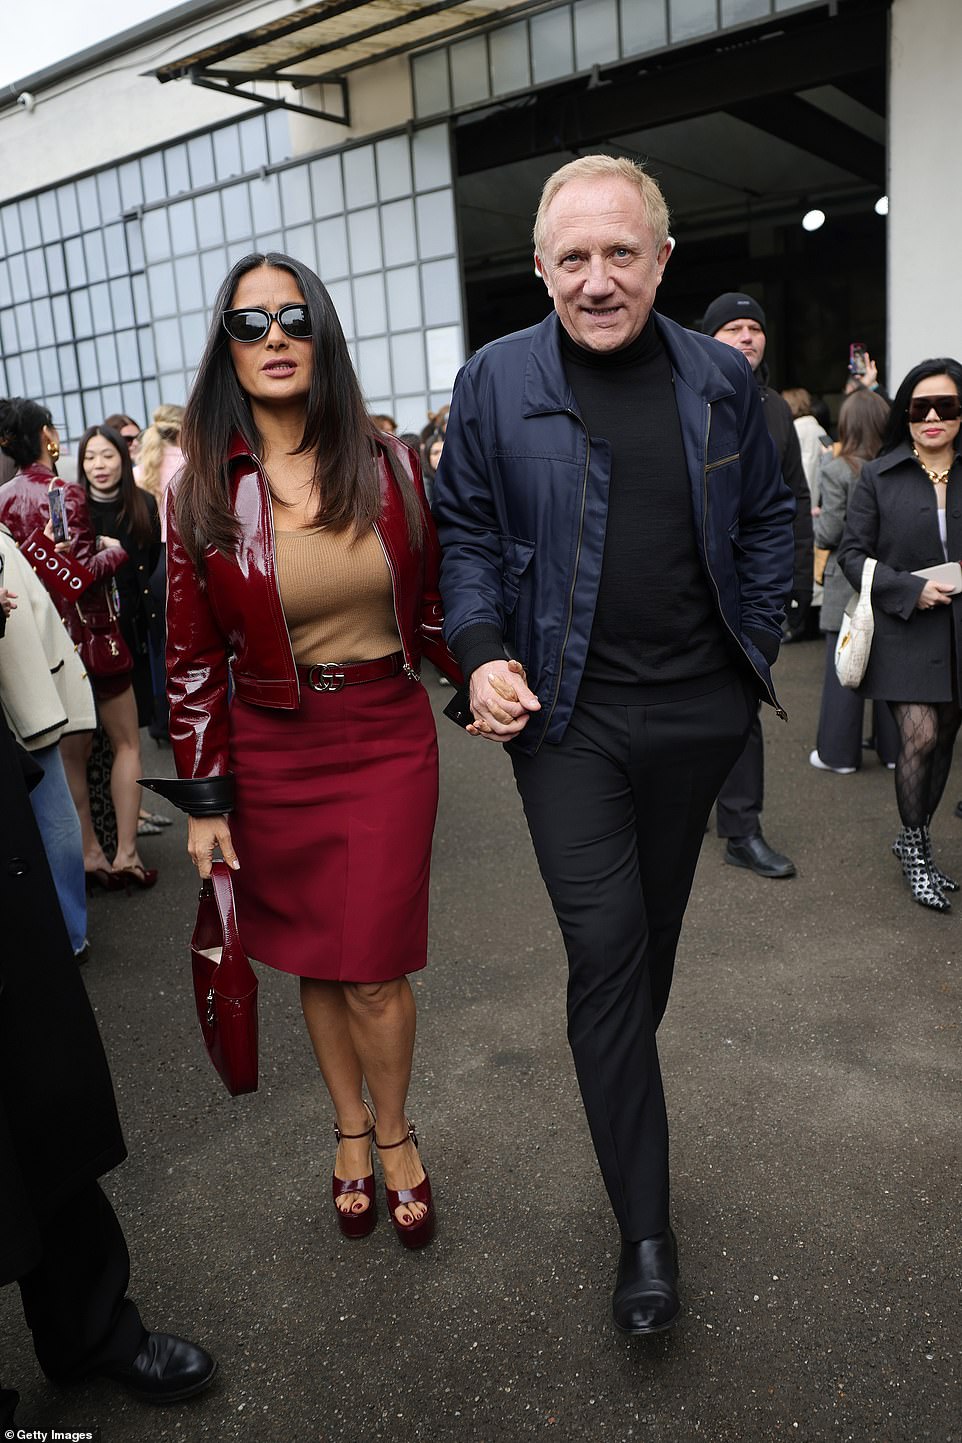 American actress Salma Hayek, 57, arrived with her husband François-Henri Pinault, 61, as the pair put on a loved up display walking hand in hand